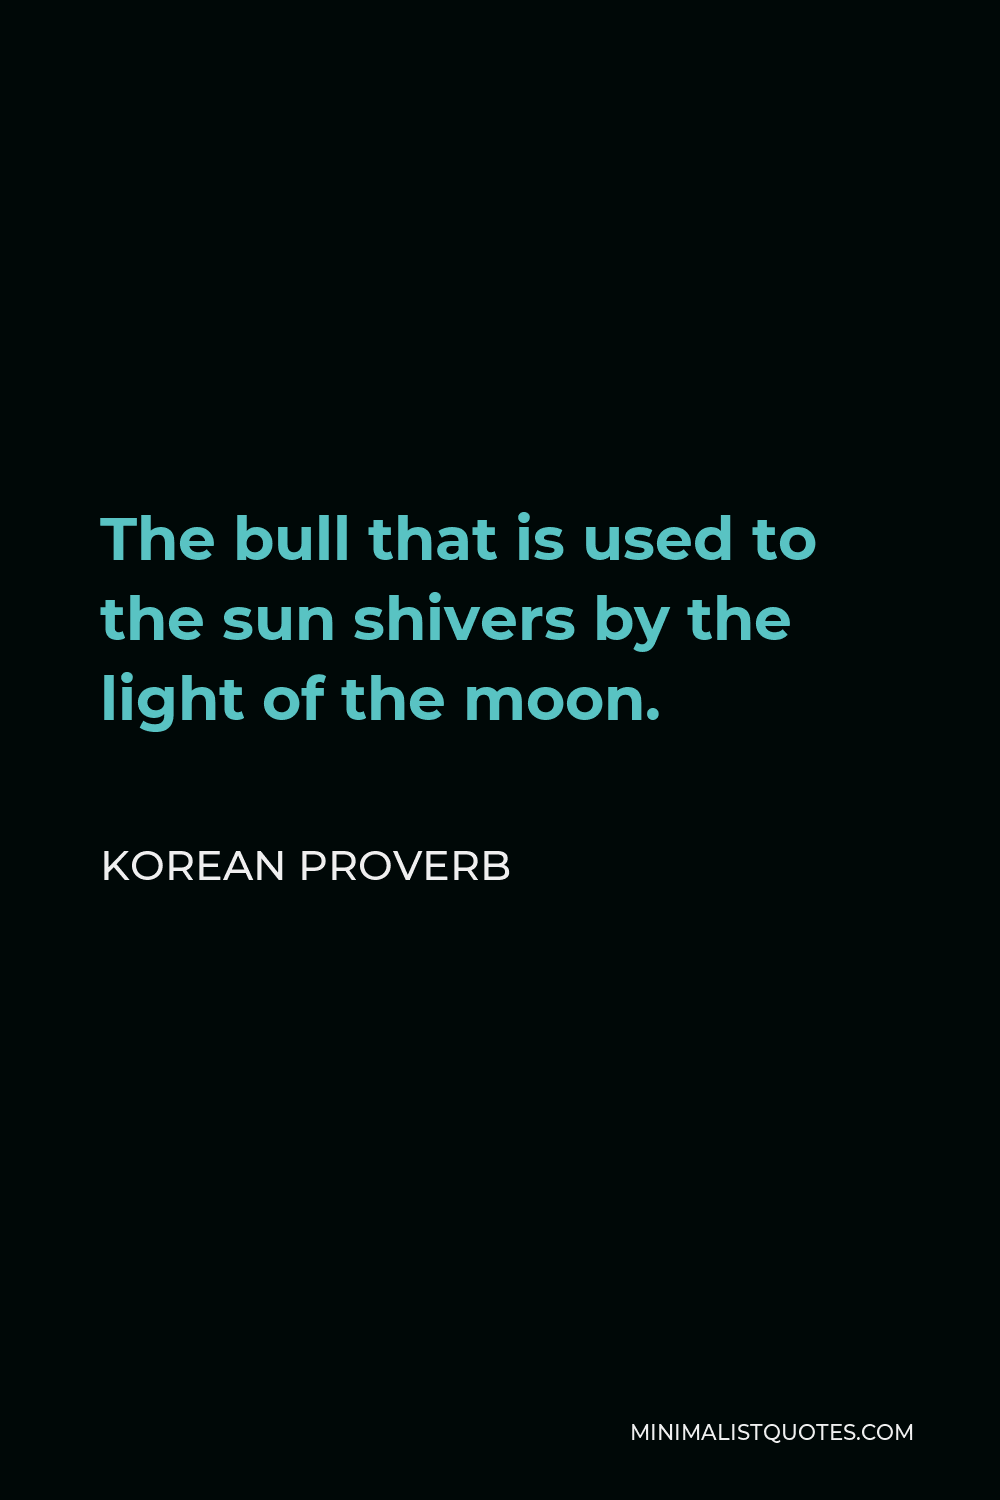 Korean Proverb Quote - The bull that is used to the sun shivers by the light of the moon.